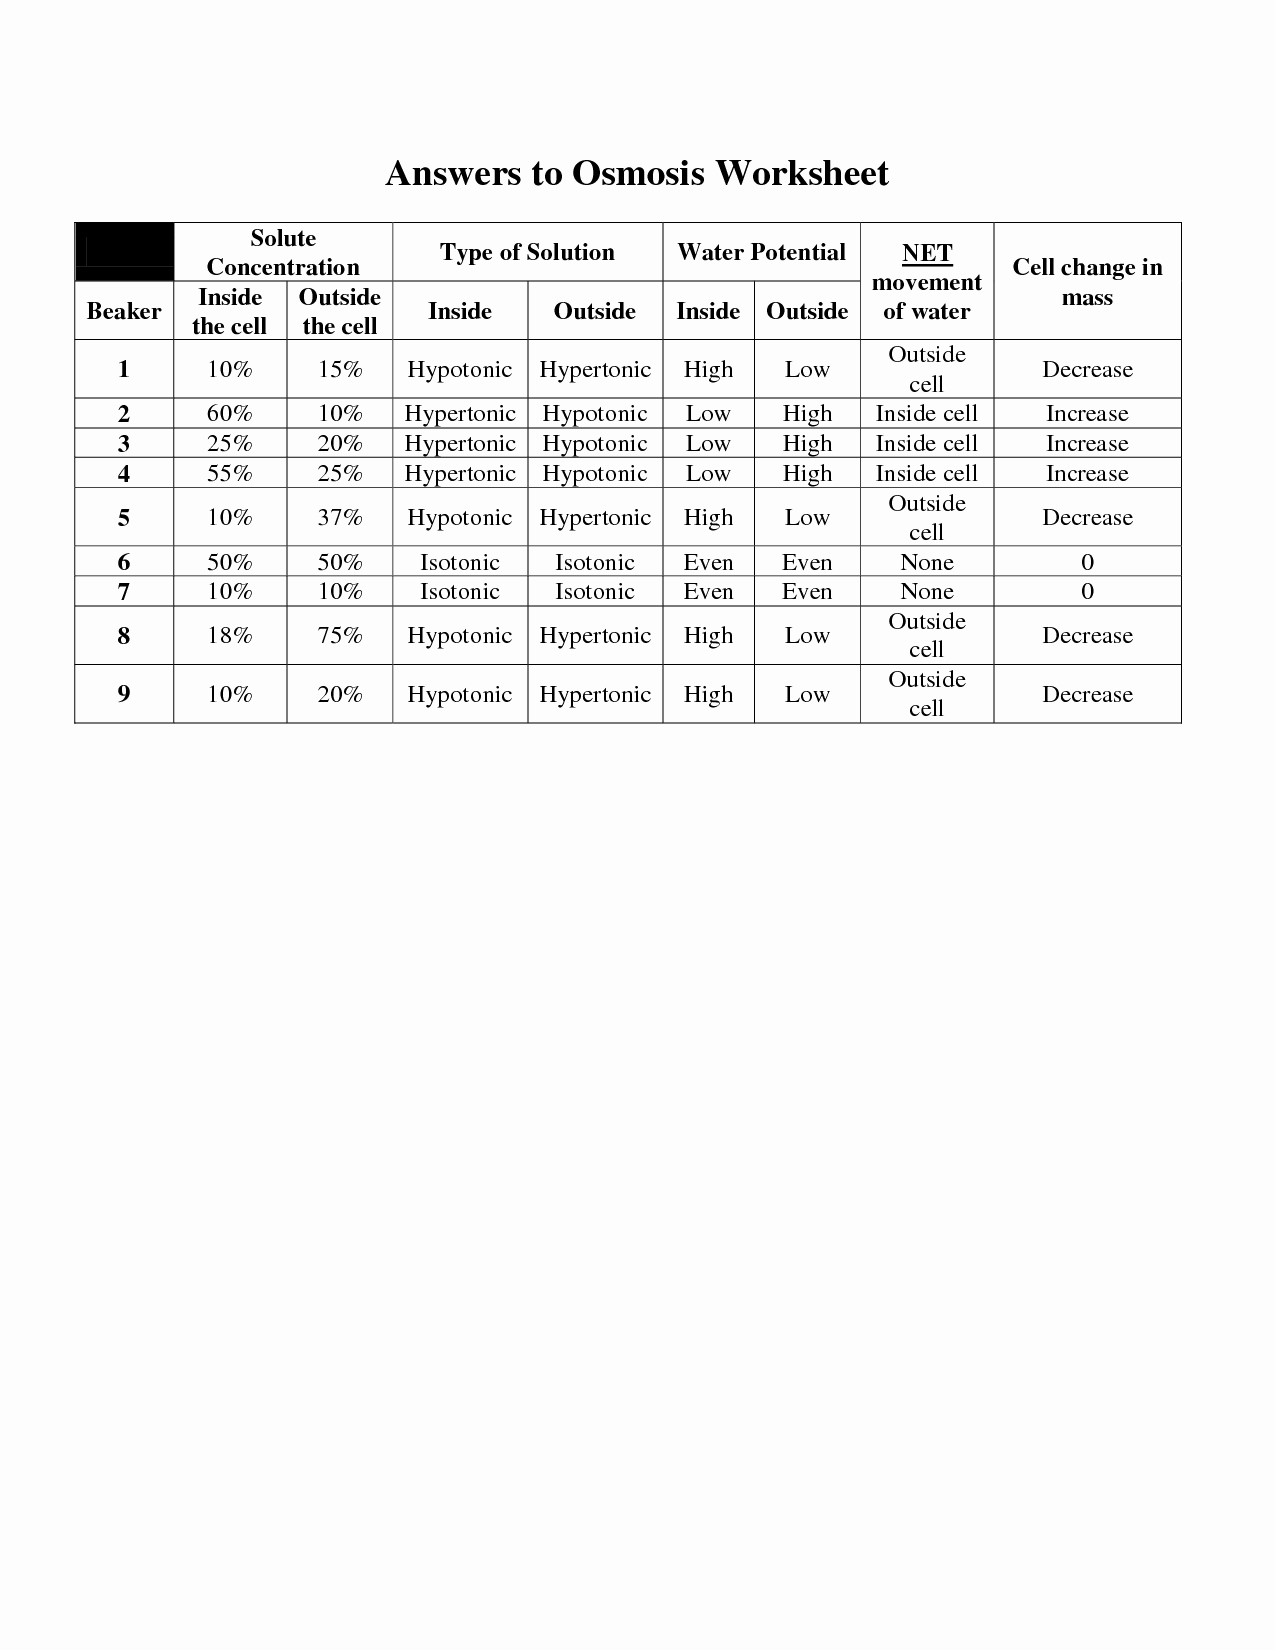 Diffusion and Osmosis Worksheet Answers New Osmosis and Diffusion Worksheet